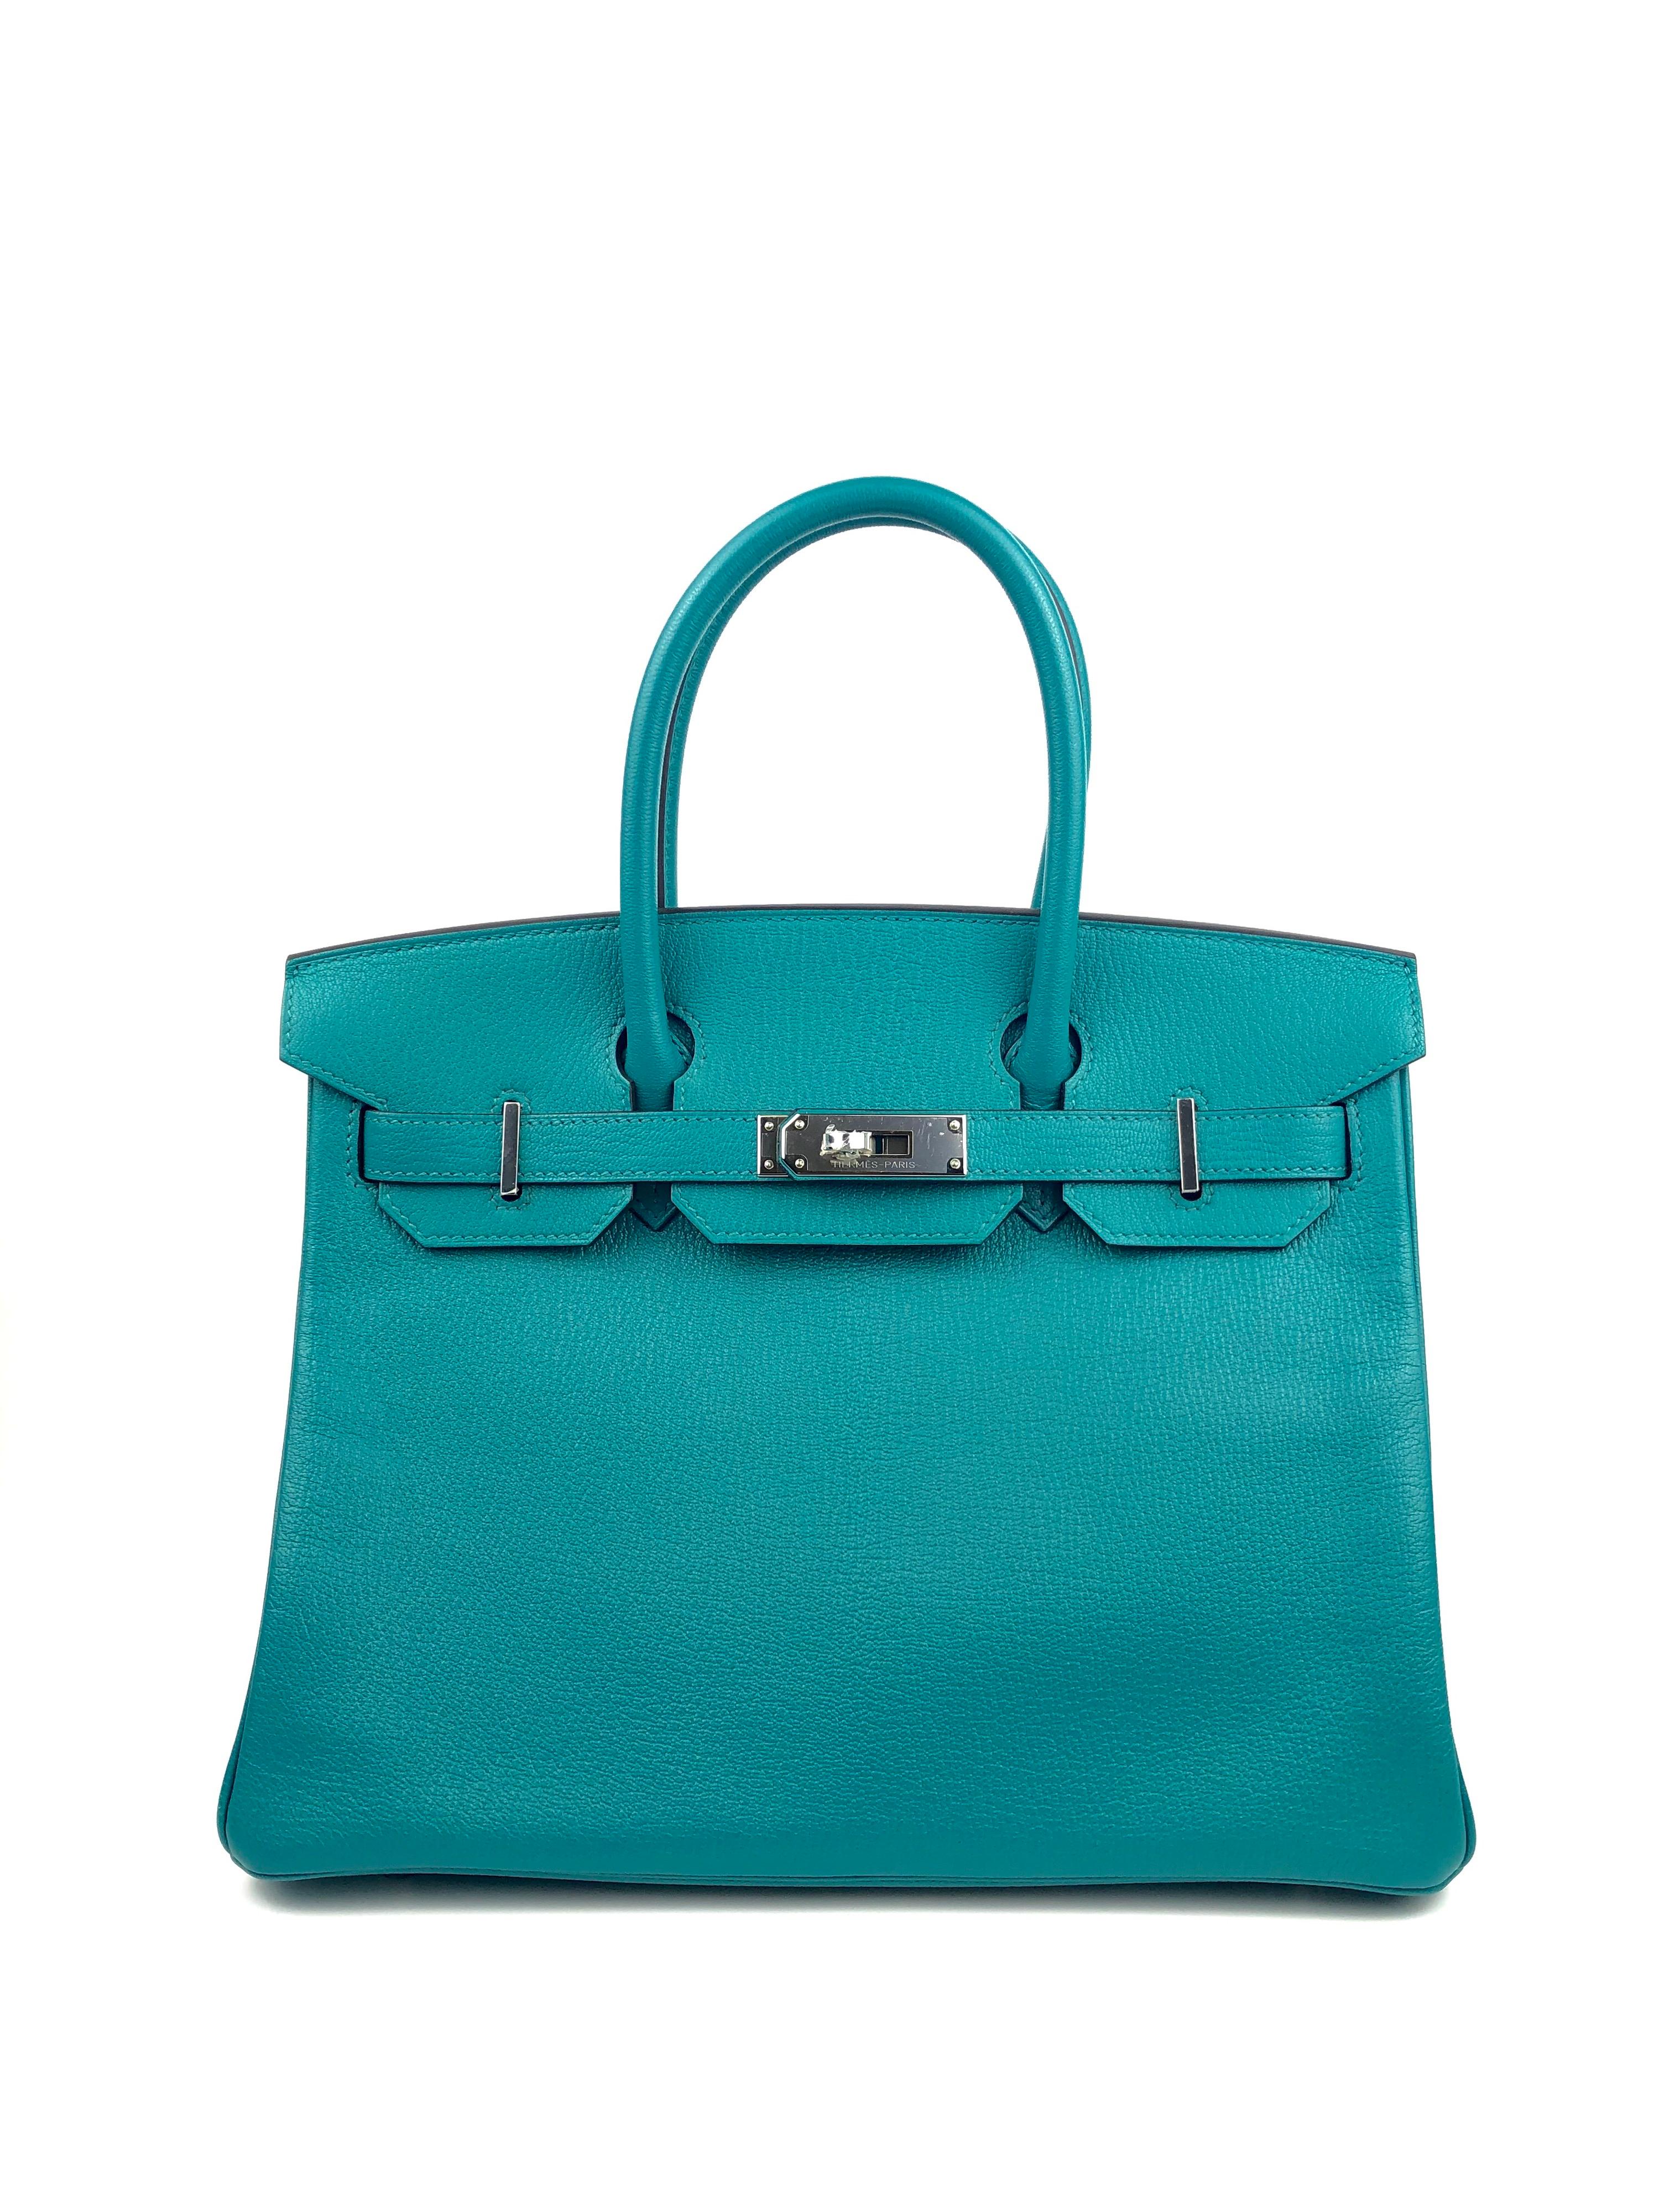 New Hermes Birkin 30 HSS Special Order Bleu Paon Mysore Chèvre Palladium Hardware. C Stamp 2018. From collectors closet has been displayed but never carried out.

Shop with Confidence from Lux Addicts. Authenticity Guaranteed! 